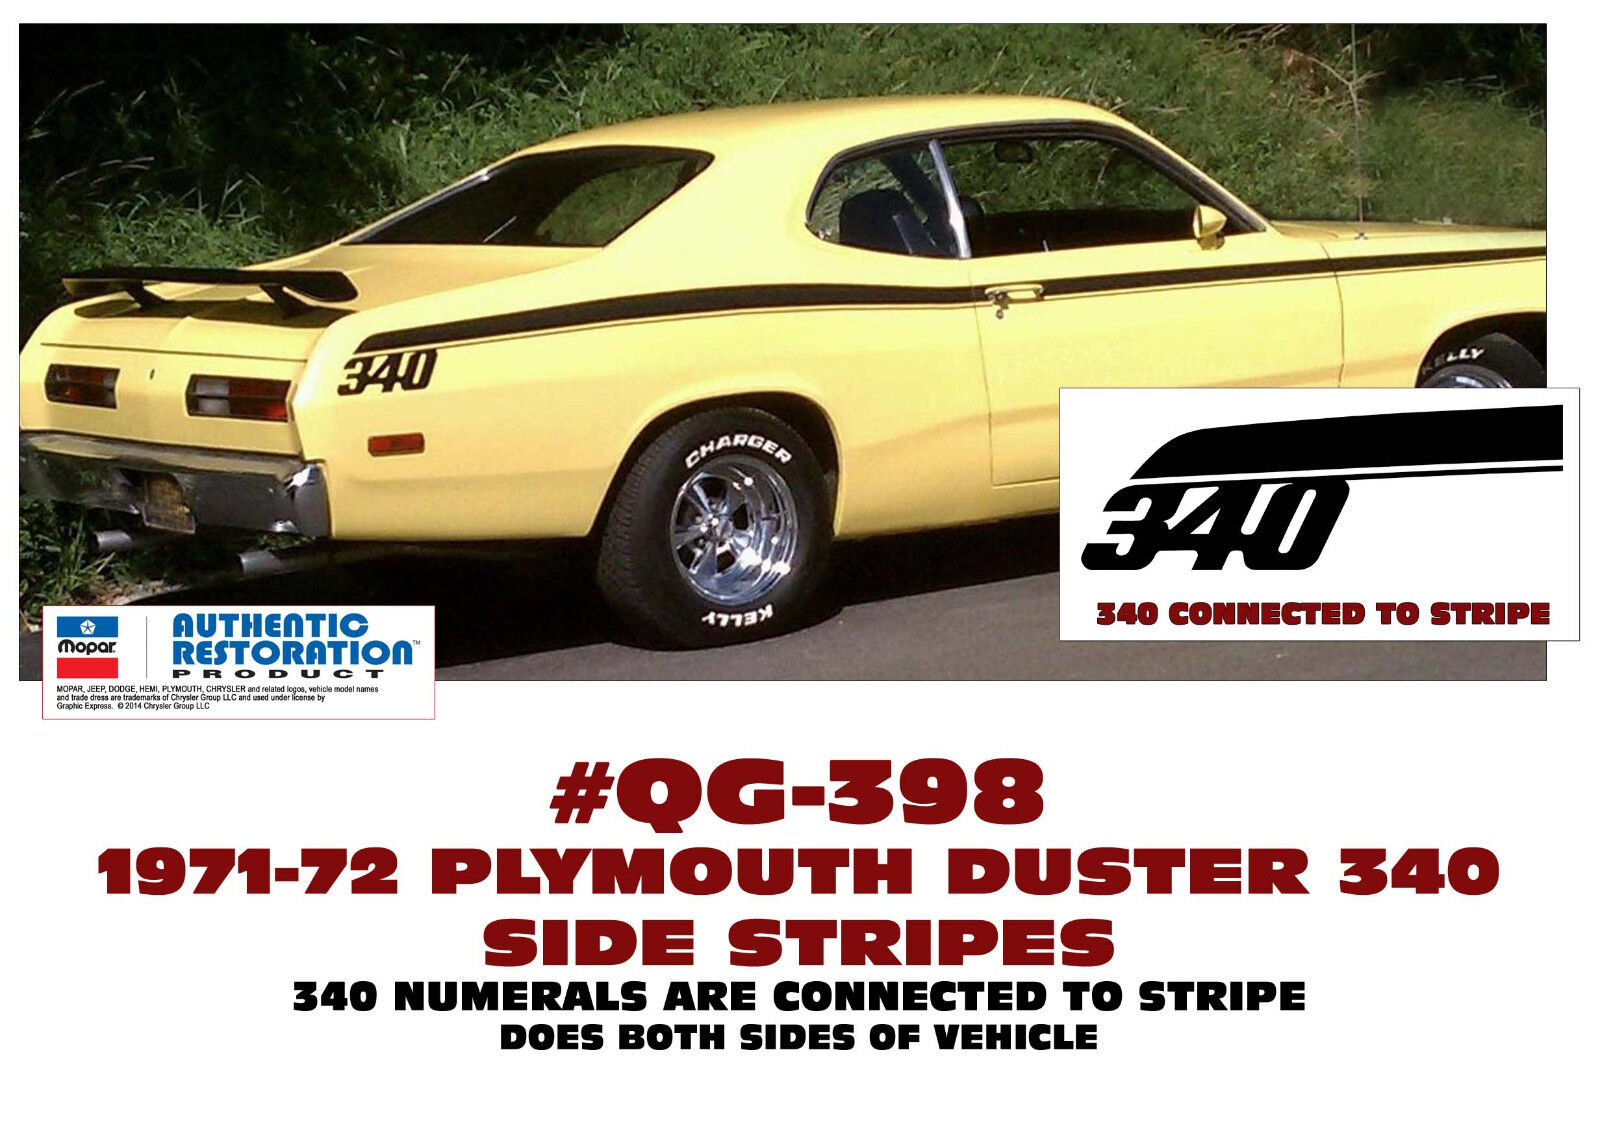 QG-398 1971-72 PLYMOUTH DUSTER 340 - SIDE STRIPE KIT - 340 CONNECTED TO STRIPE